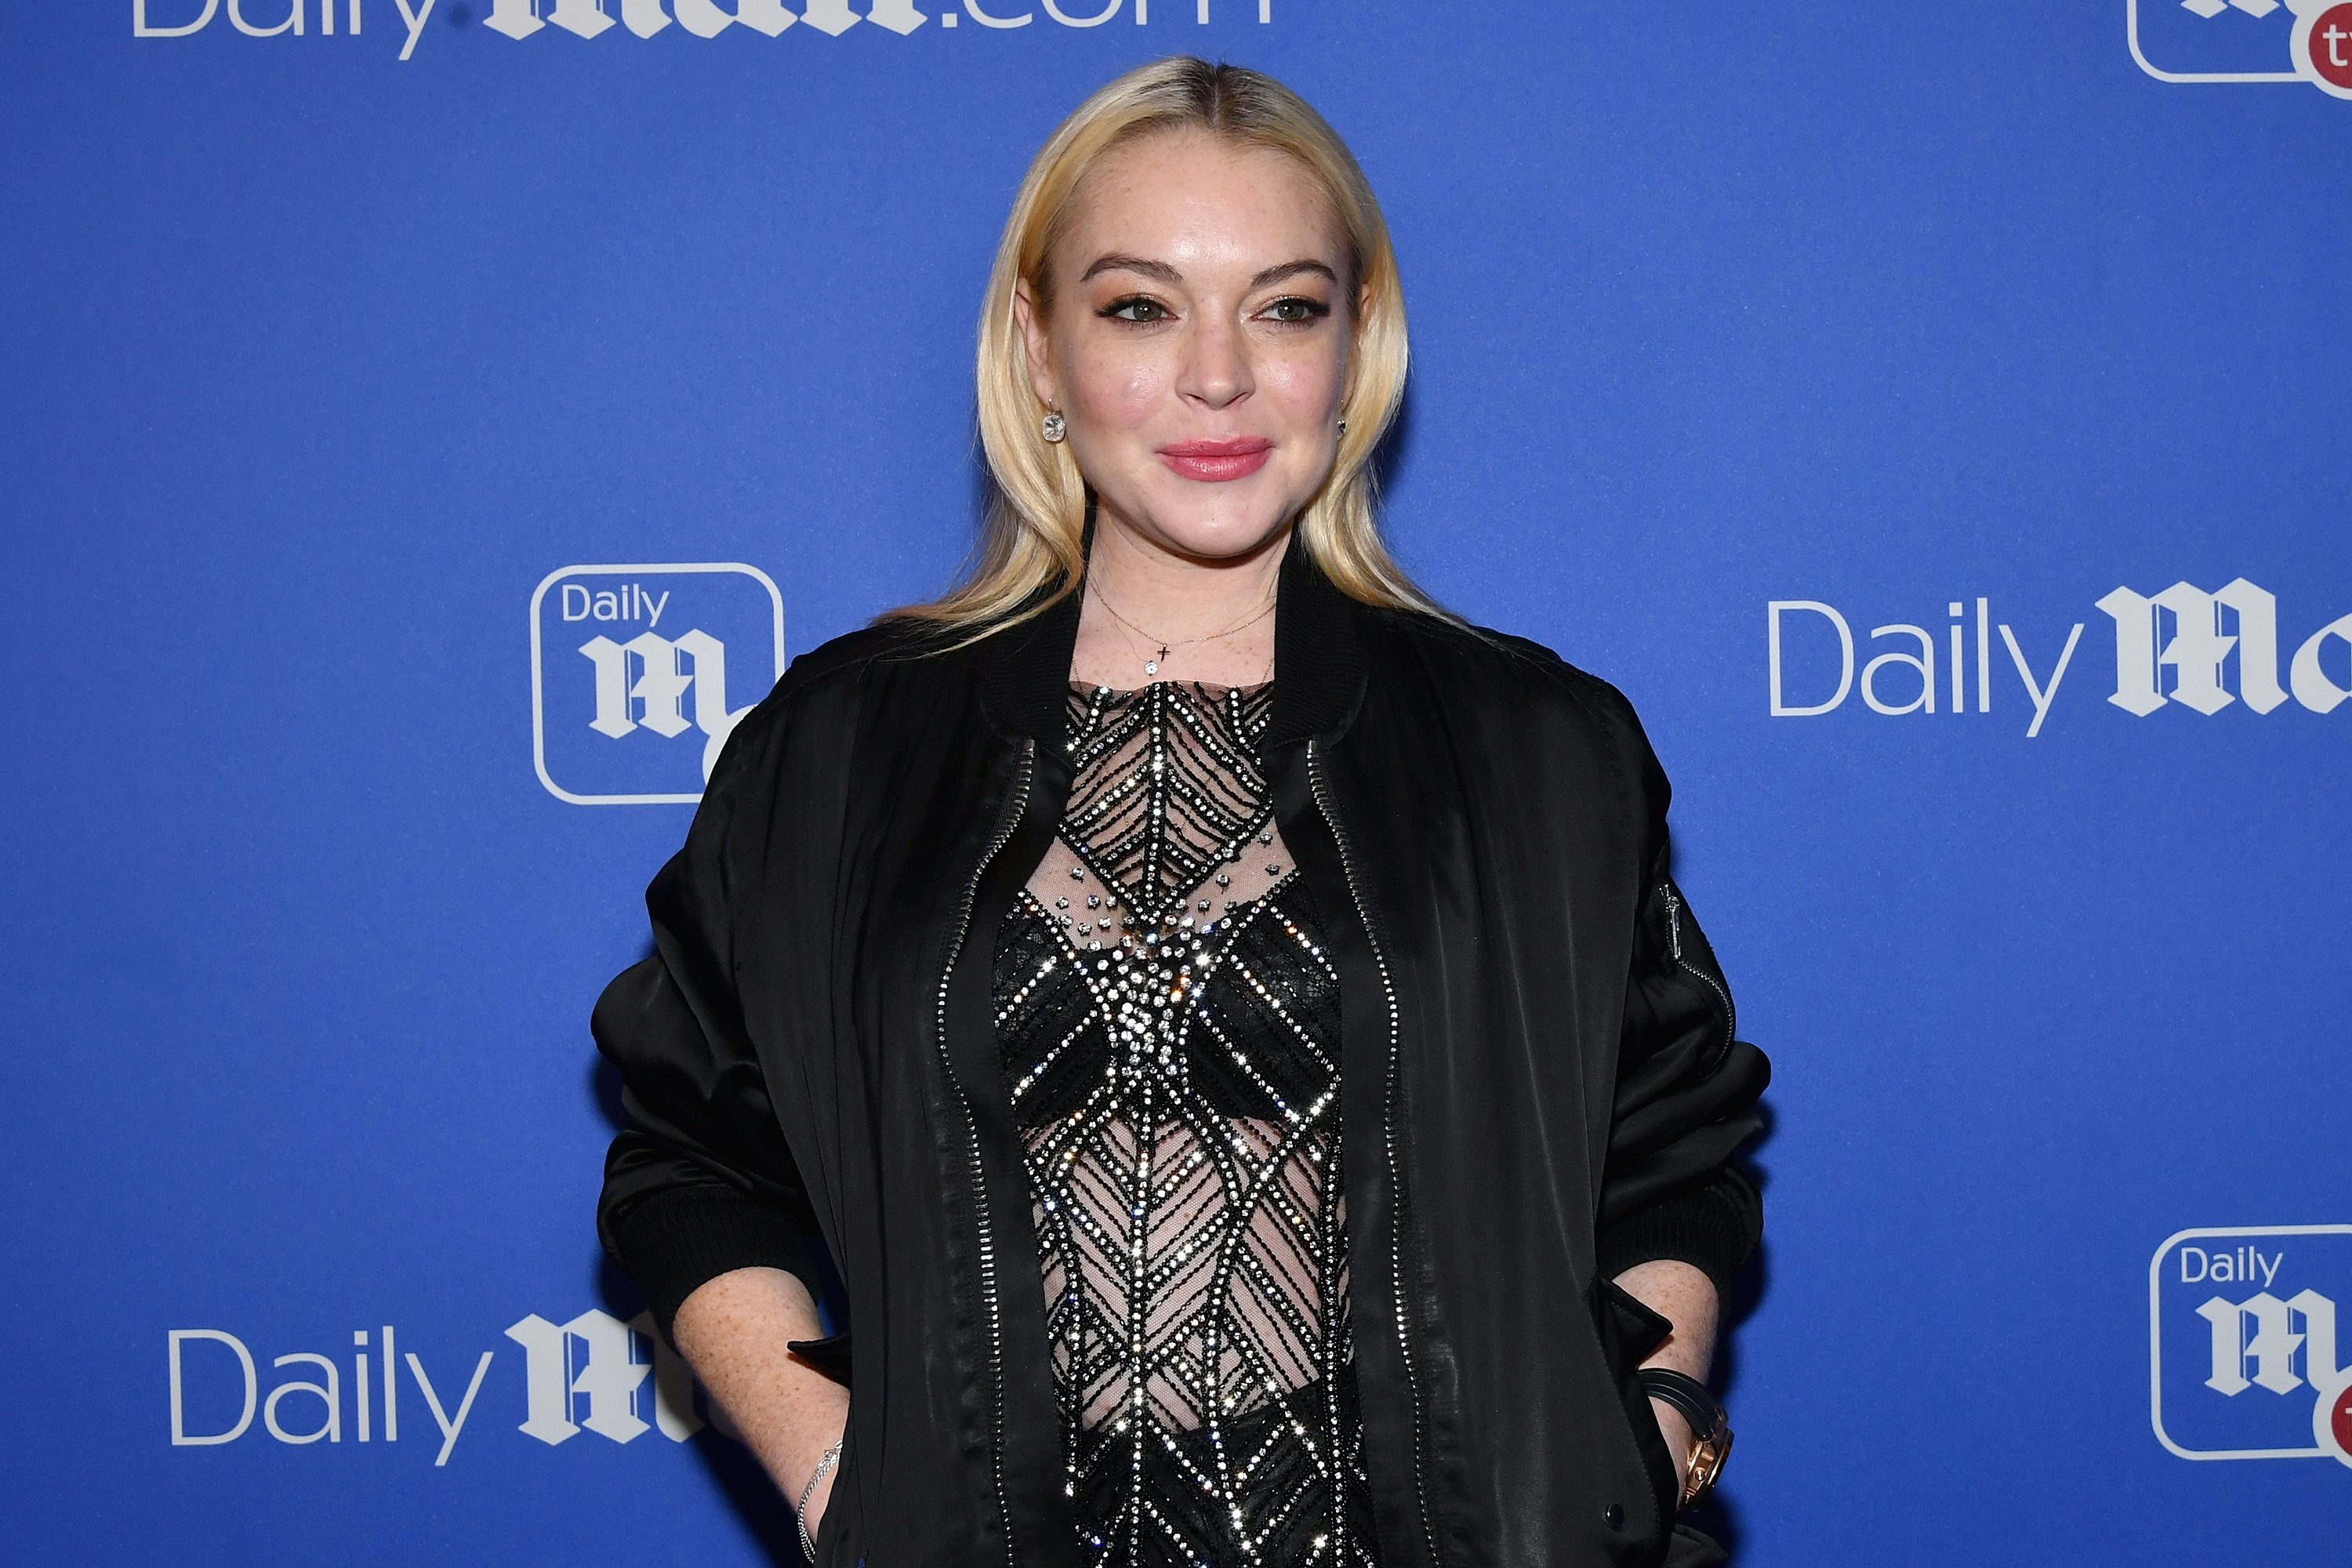 Lindsay Lohan pictured at the DailyMail.com & DailyMailTV Holiday Party, 2017, New York City. | Photo: Getty Images